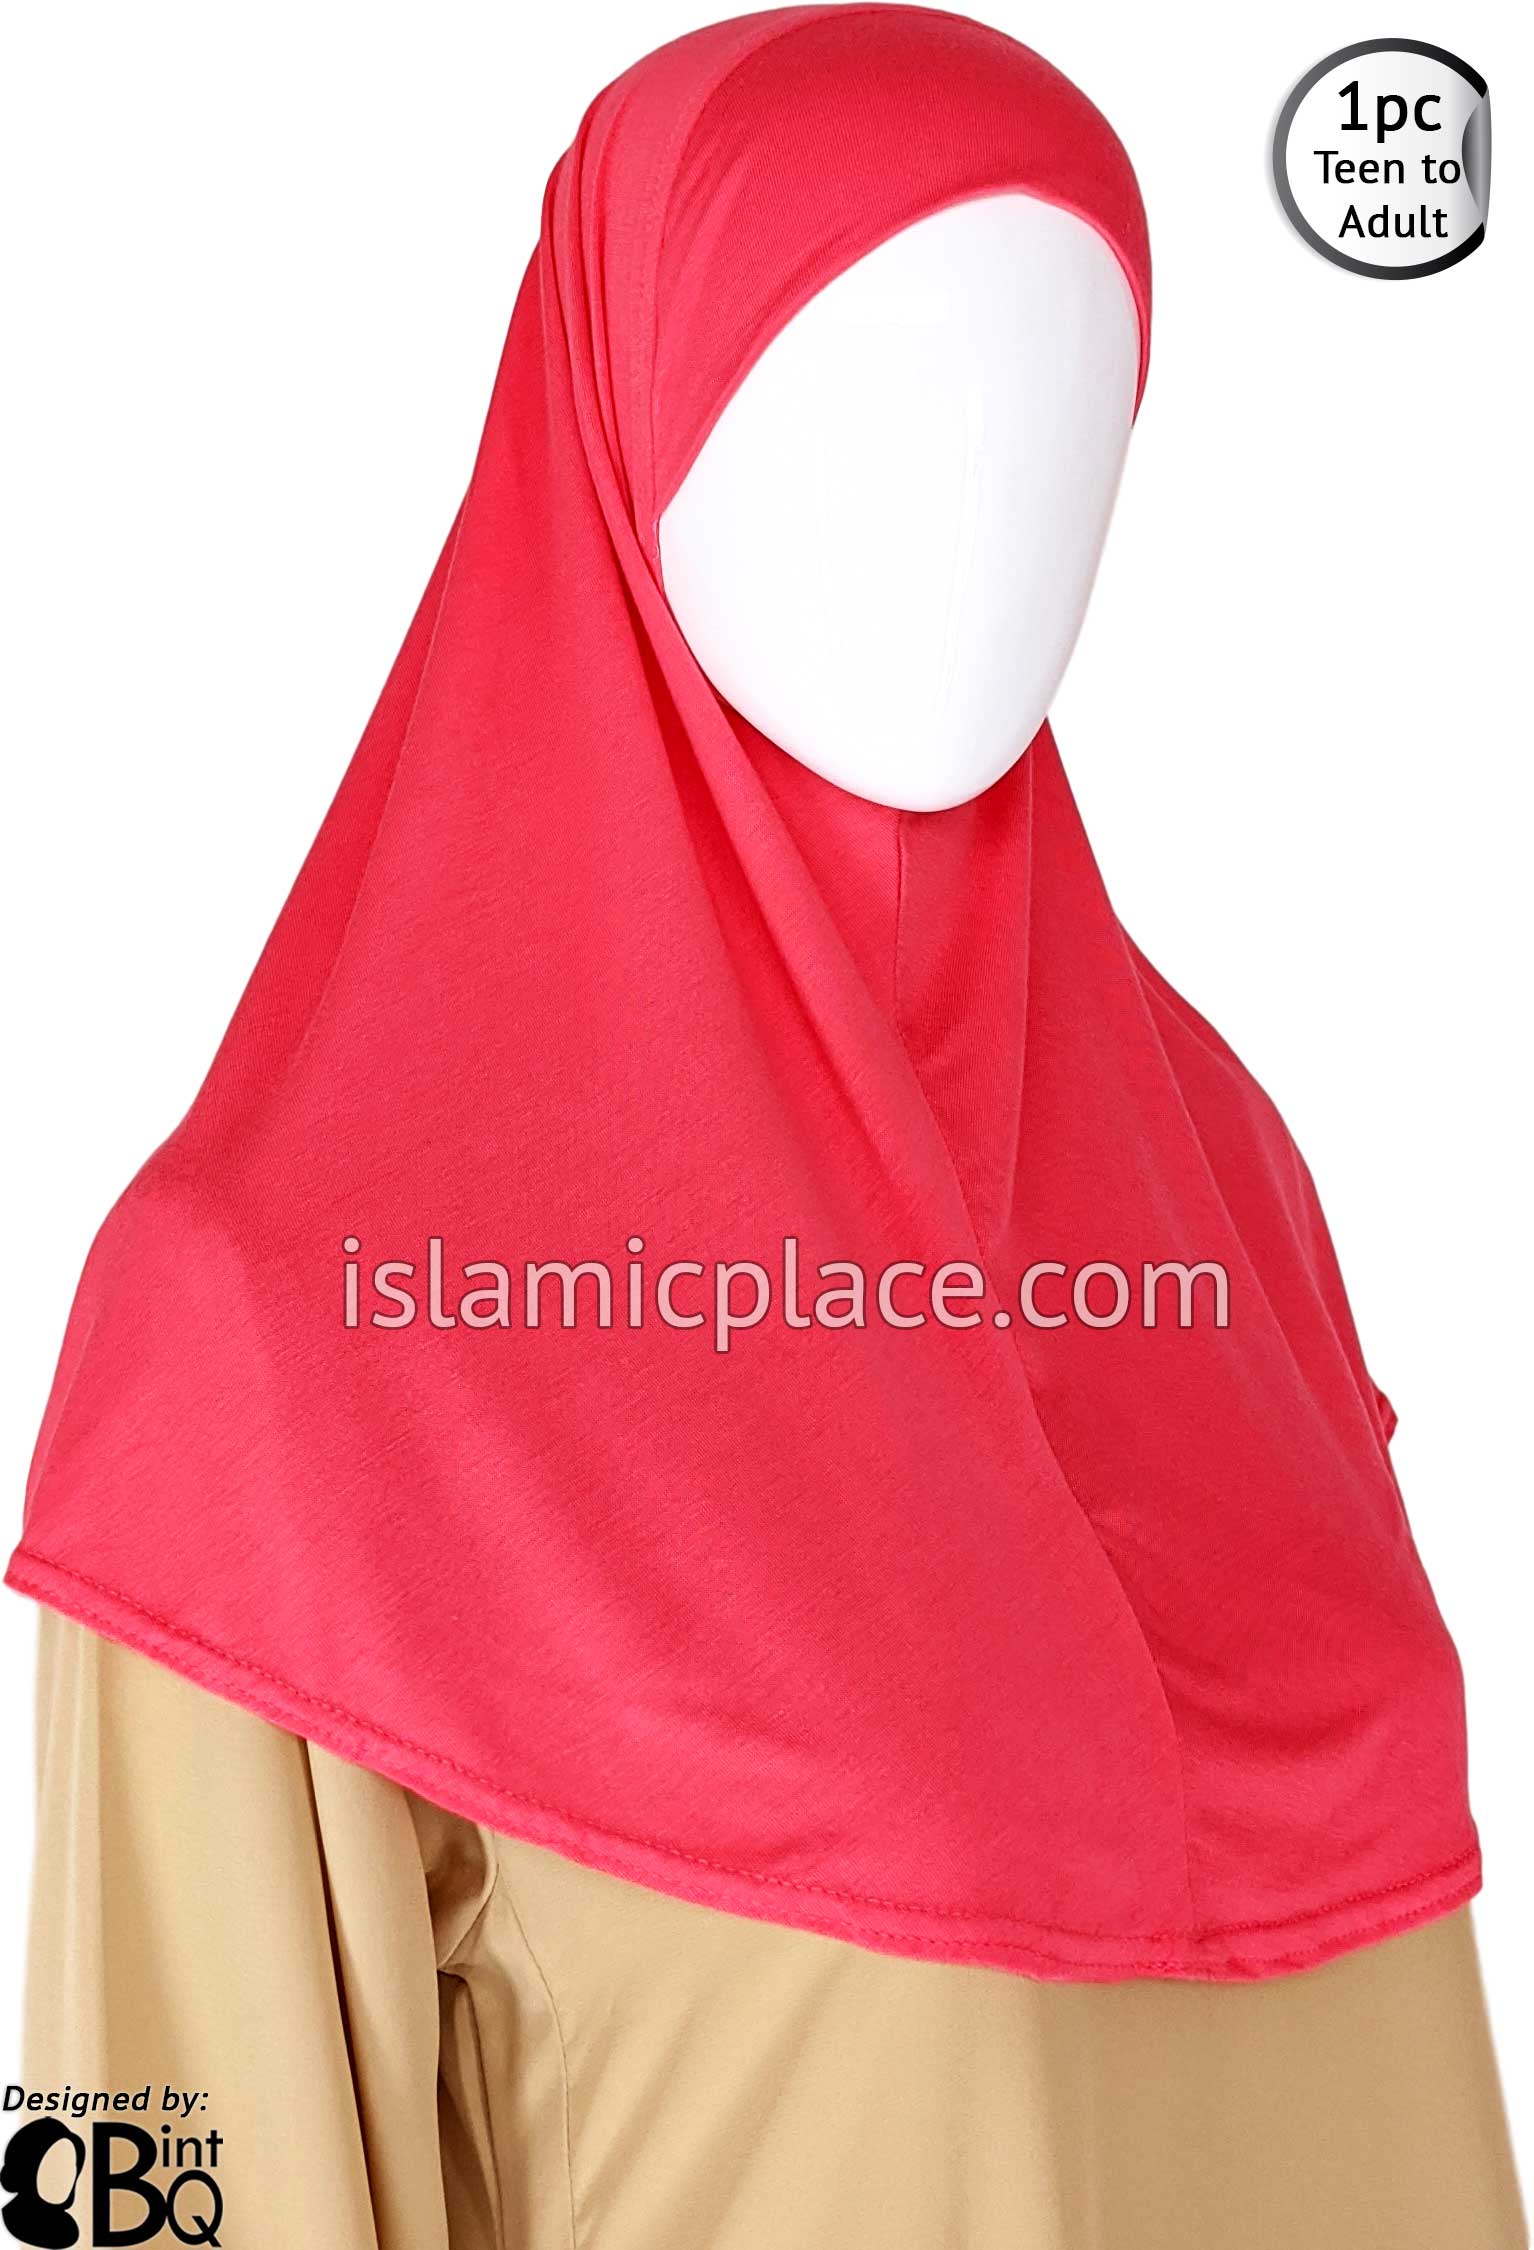 Coral - Plain Teen to Adult (Large) Hijab Al-Amira (1-piece style)